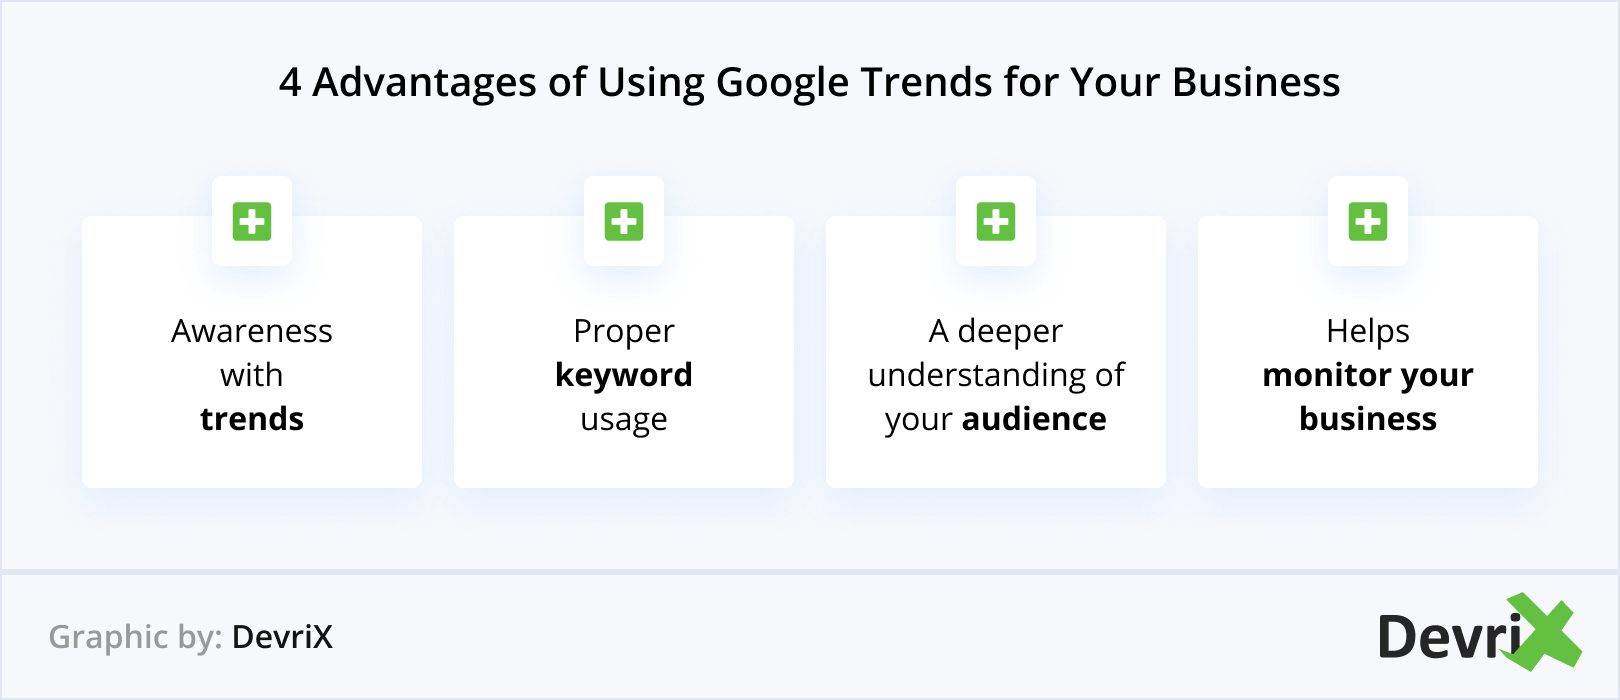 4 Advantages of Using Google Trends for Your Business